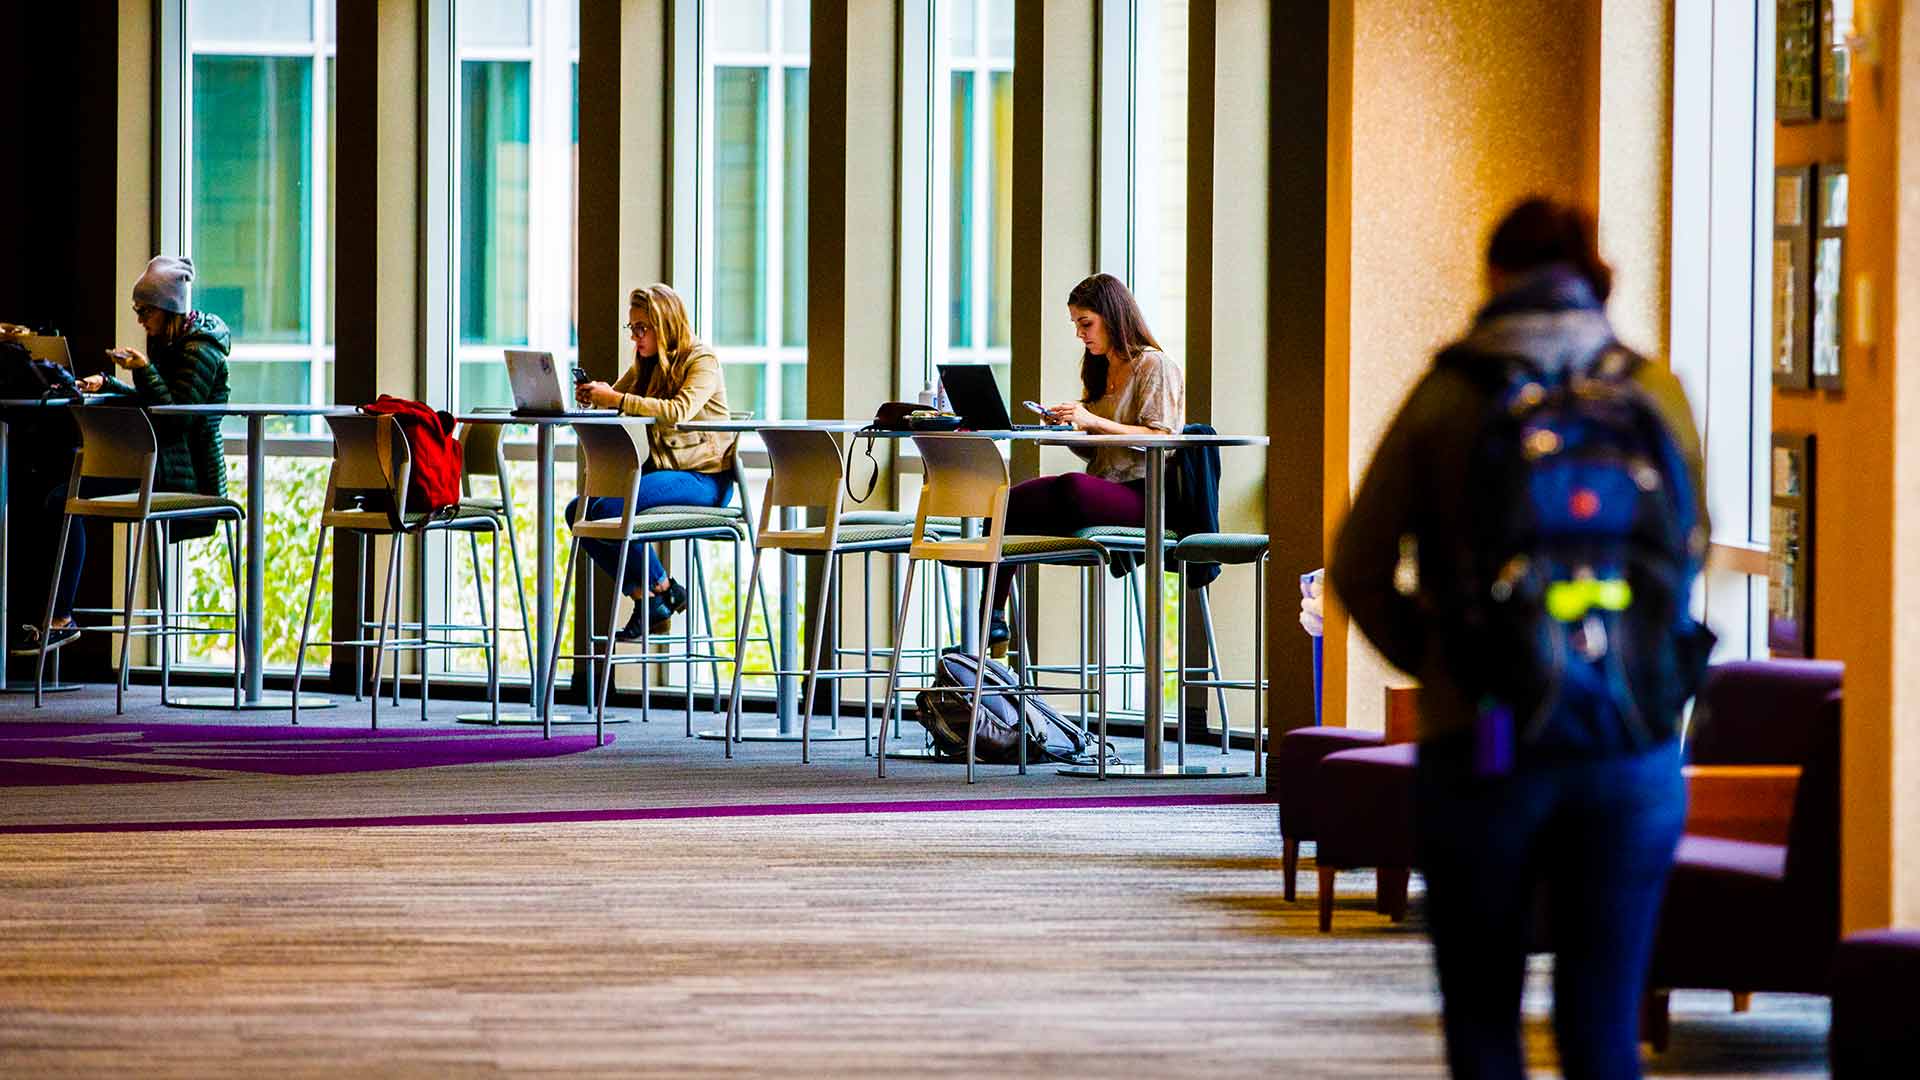 Students studying between classes in the skyway.